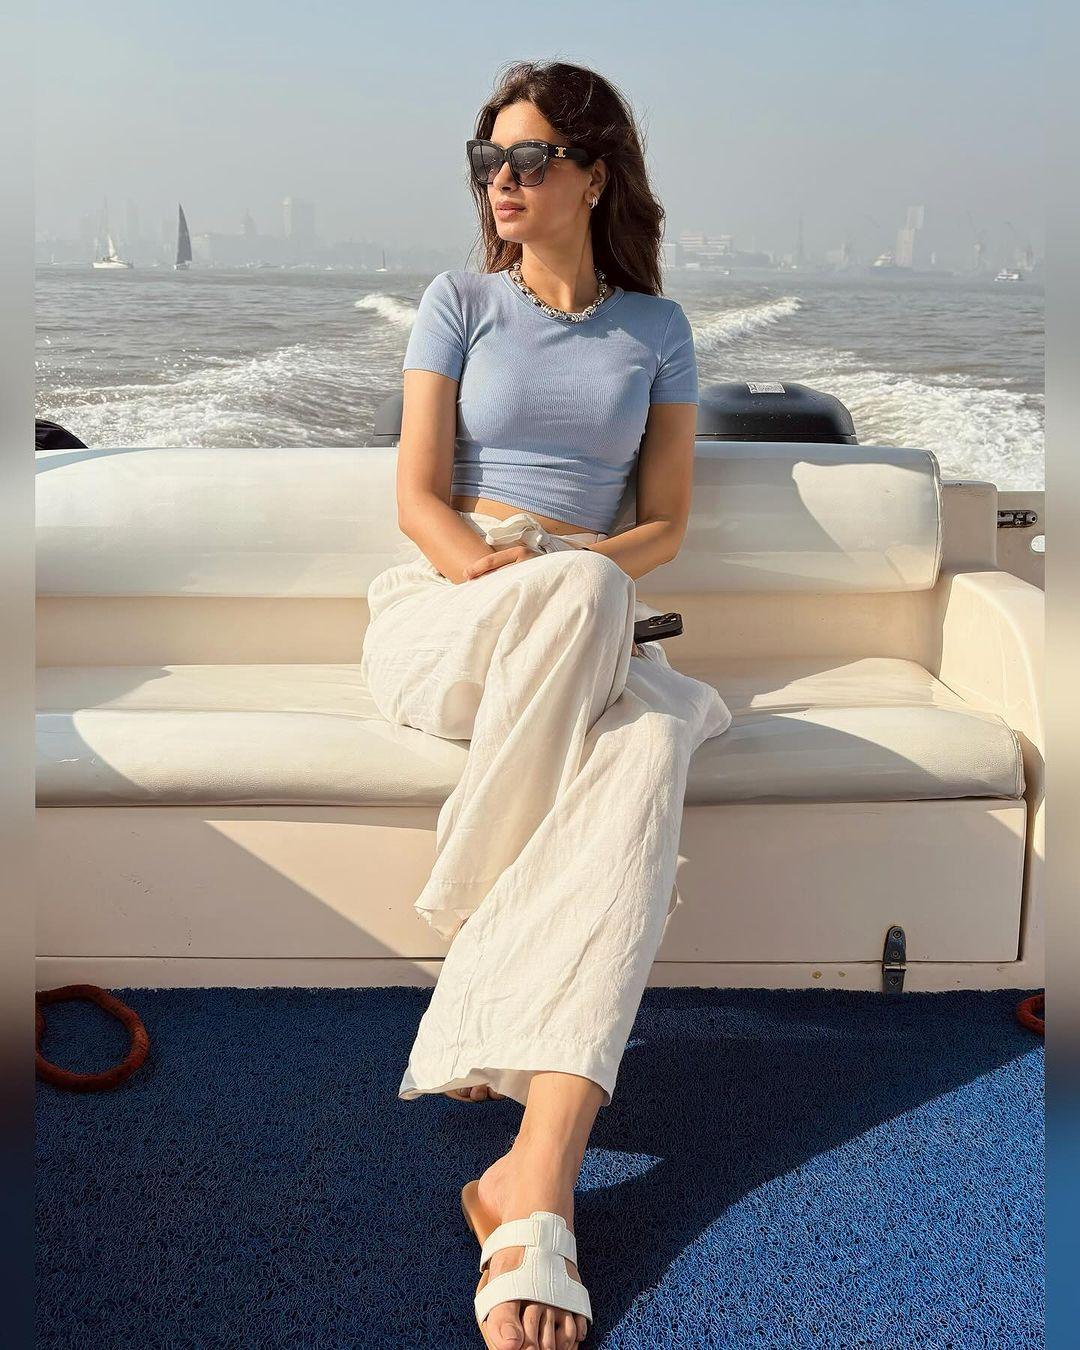 Diana Penty took a boat ride near Gateway of India. Sharing the photos, she wrote, 